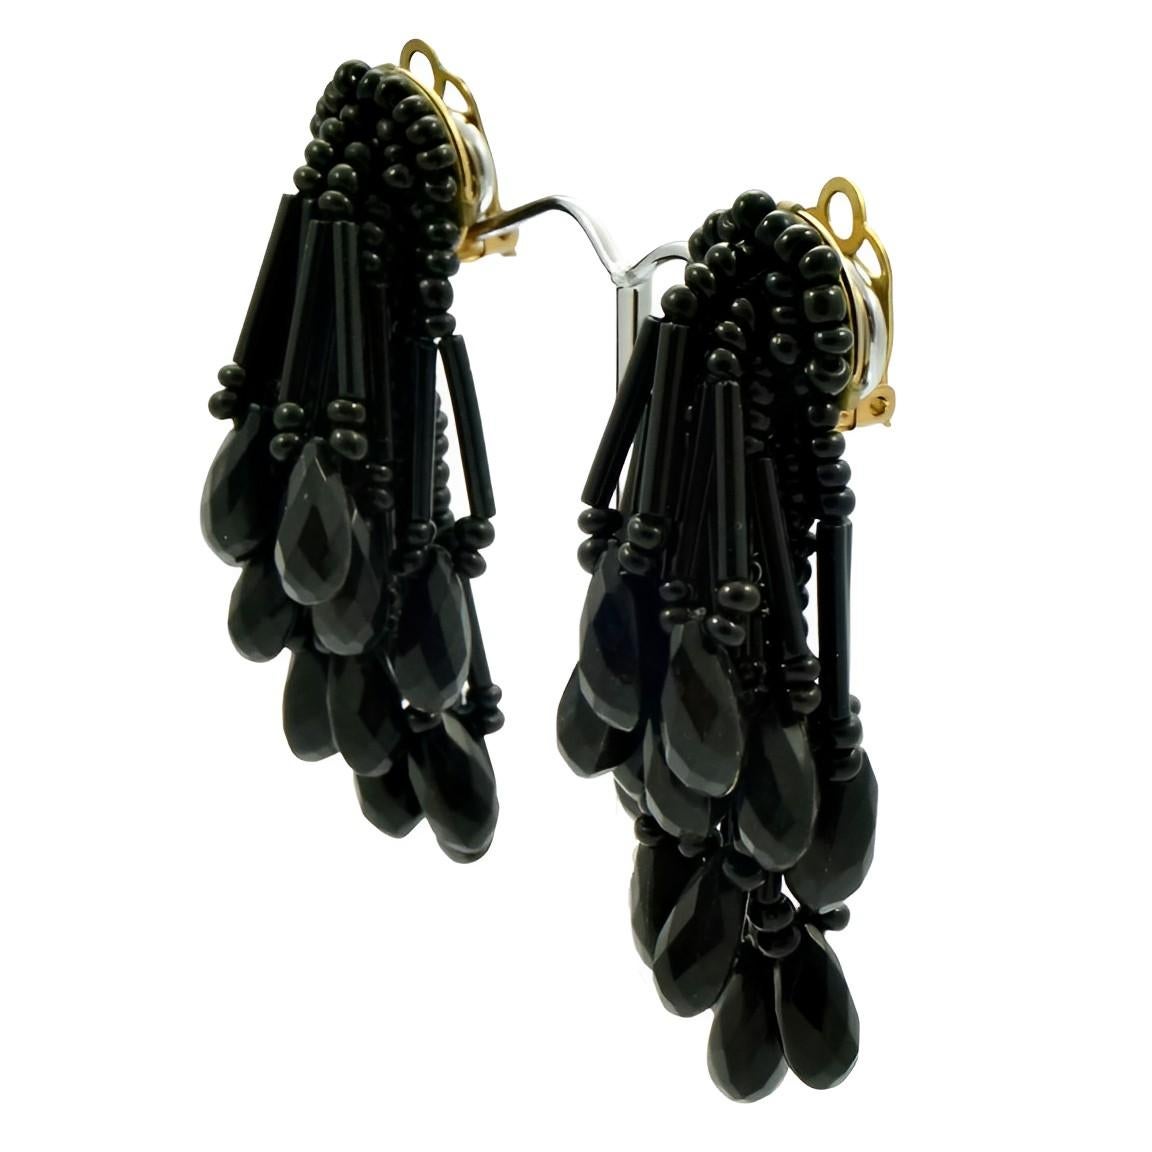 Fabulous french jet clip on earrings, featuring thirteen lovely beaded drops on each earring. Measuring length 6.2 cm / 2.4 inches. There is wear to the gold plating on the back of the clips.

This is a beautiful pair of classic 1960s black glass